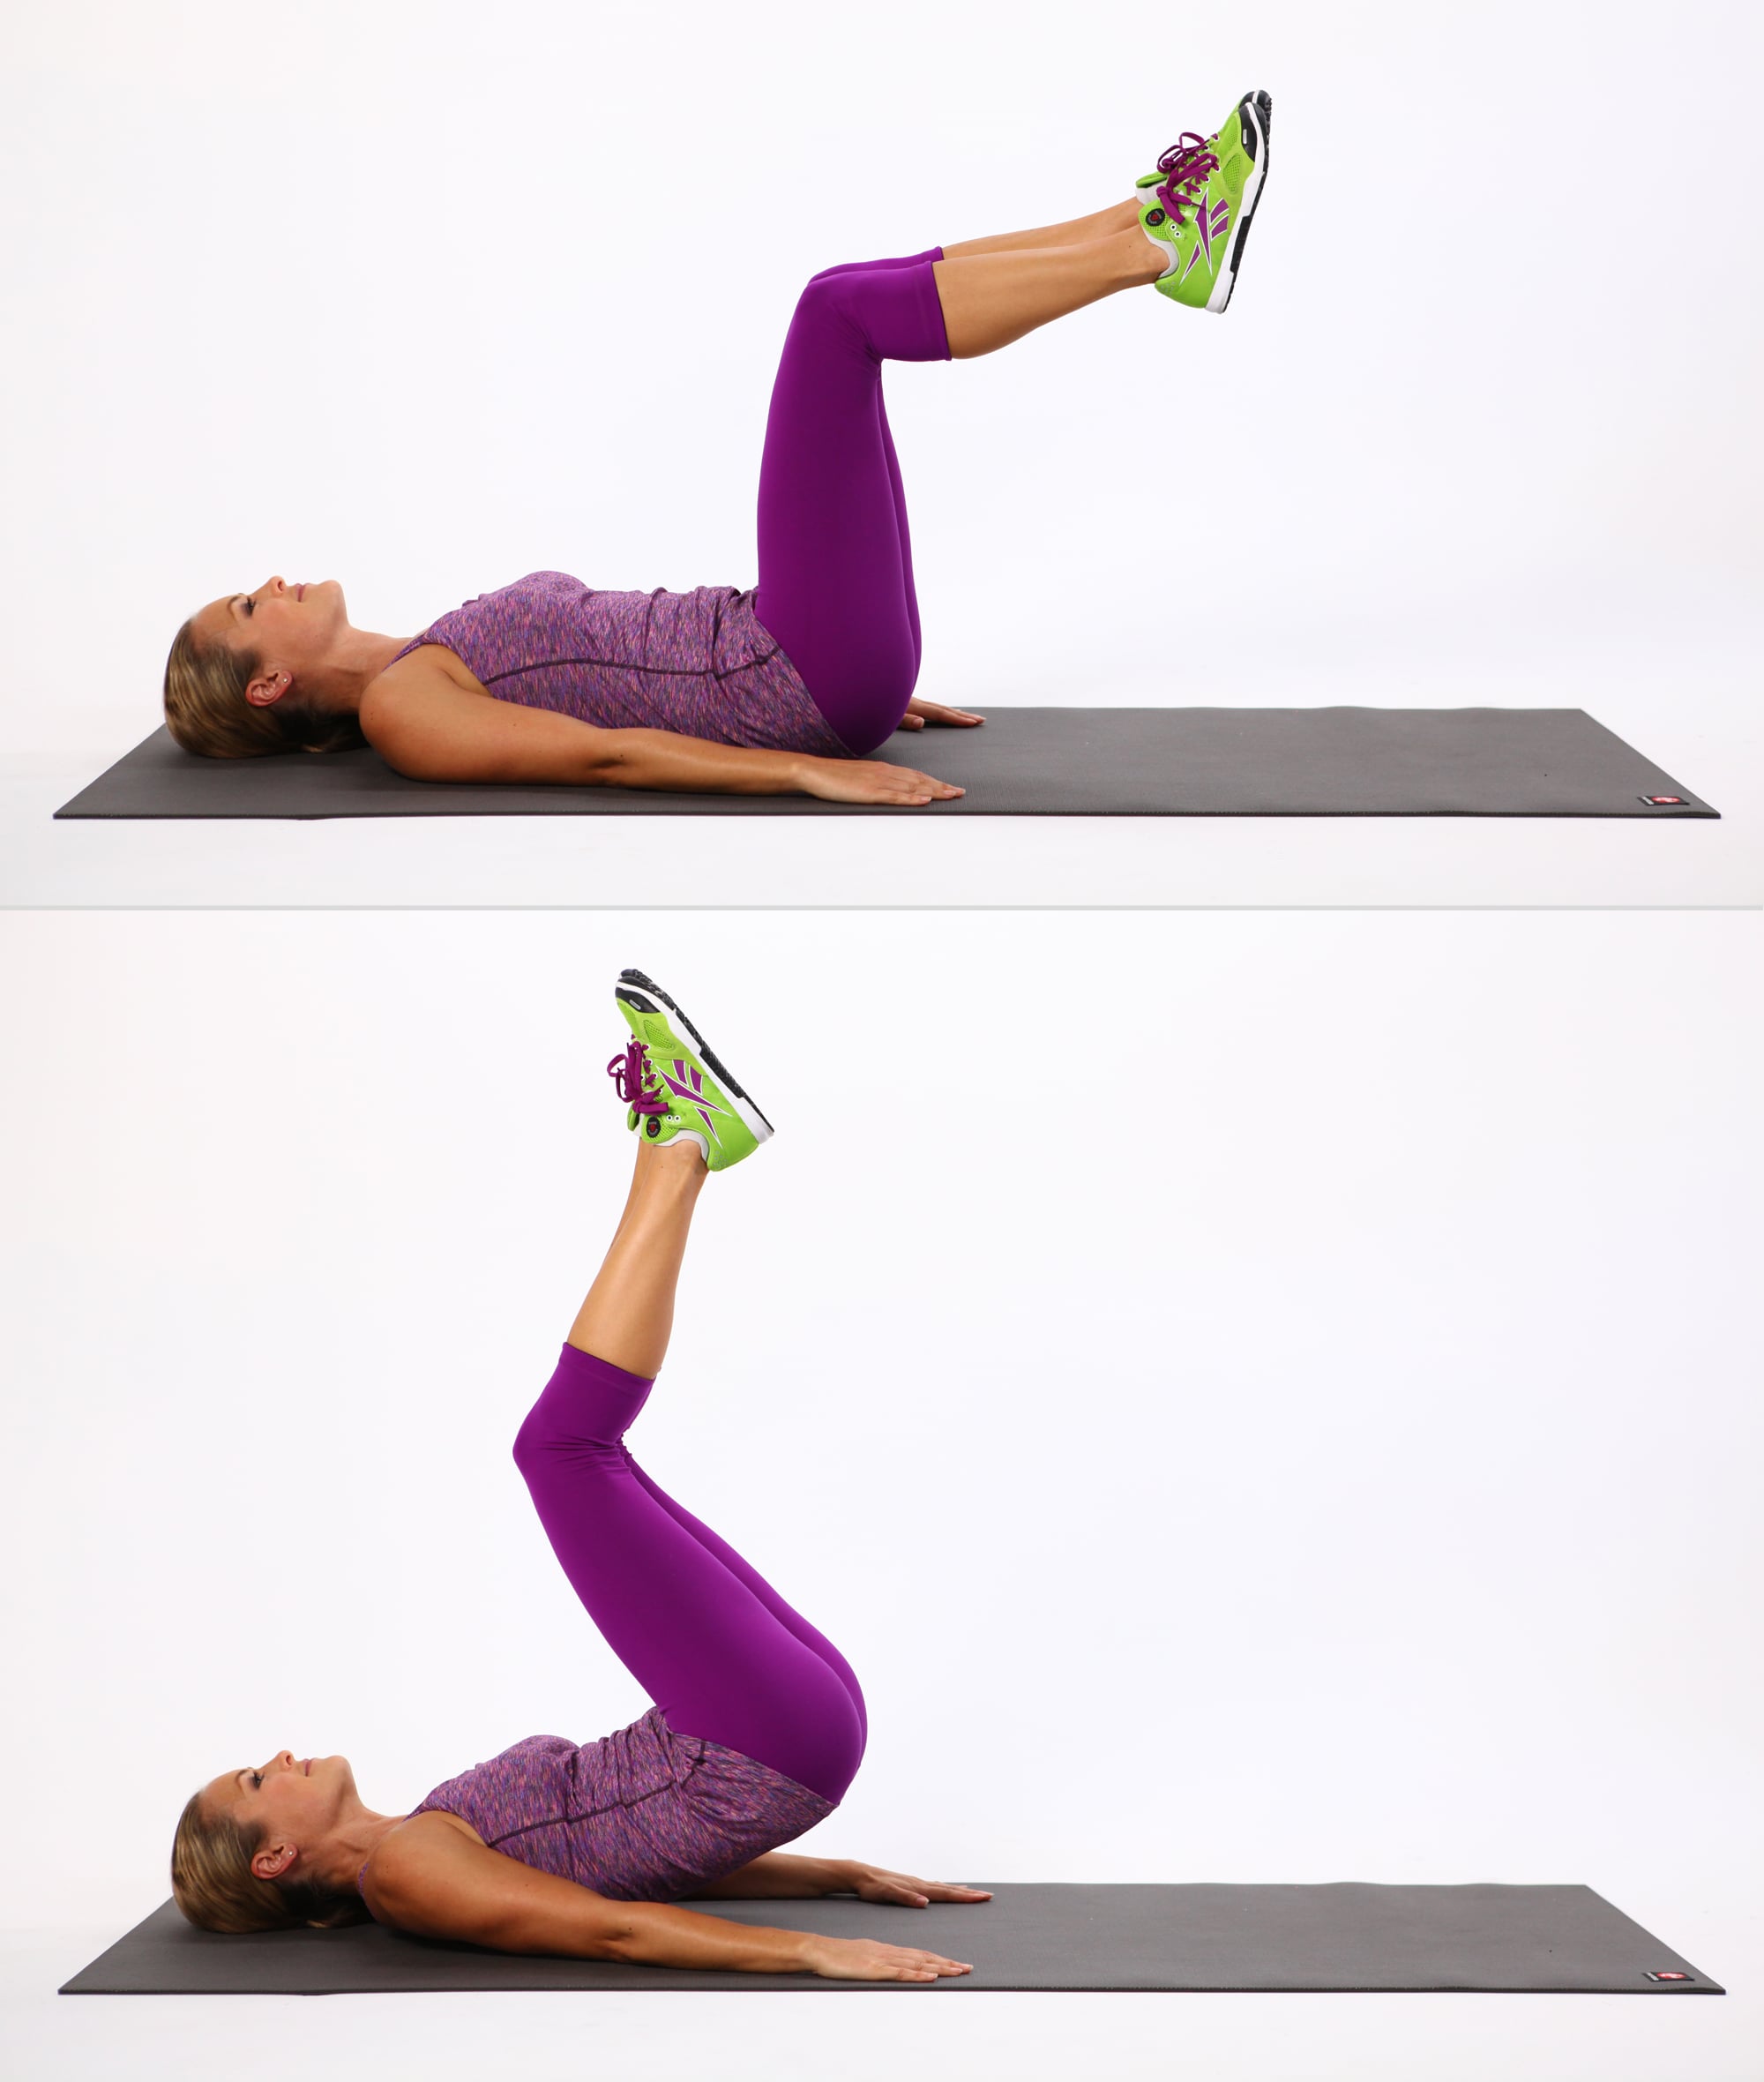 Reverse Crunch: Why This Ab Exercise is Better than the Original